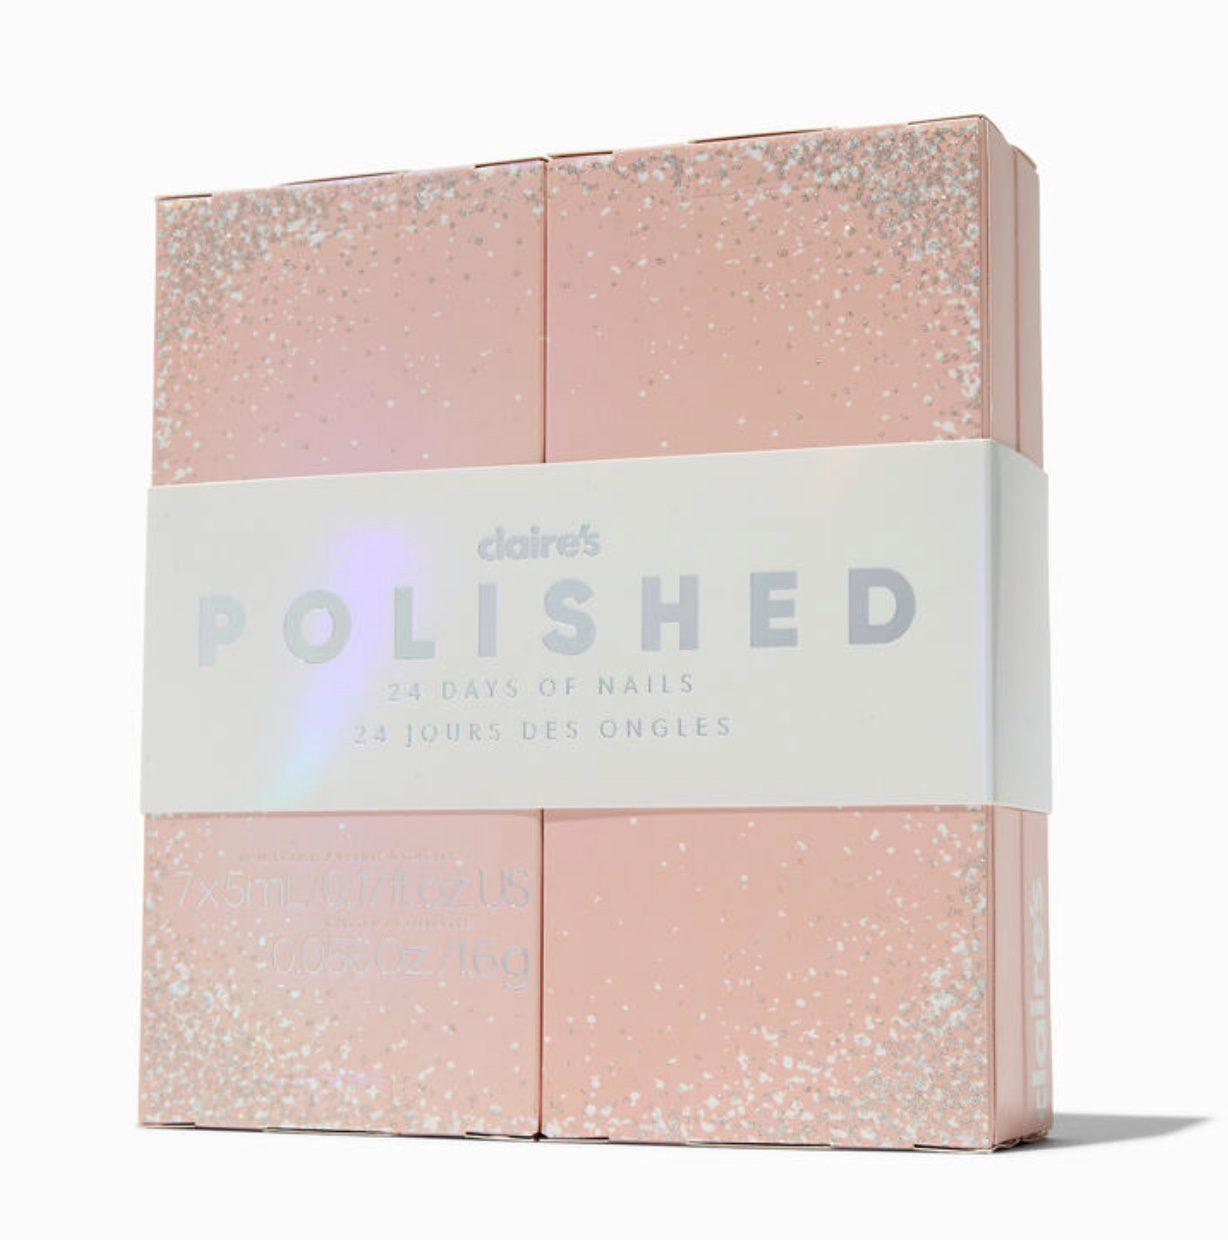 Read more about the article Claire’s Polished 24 Days of Nails Advent Calendar